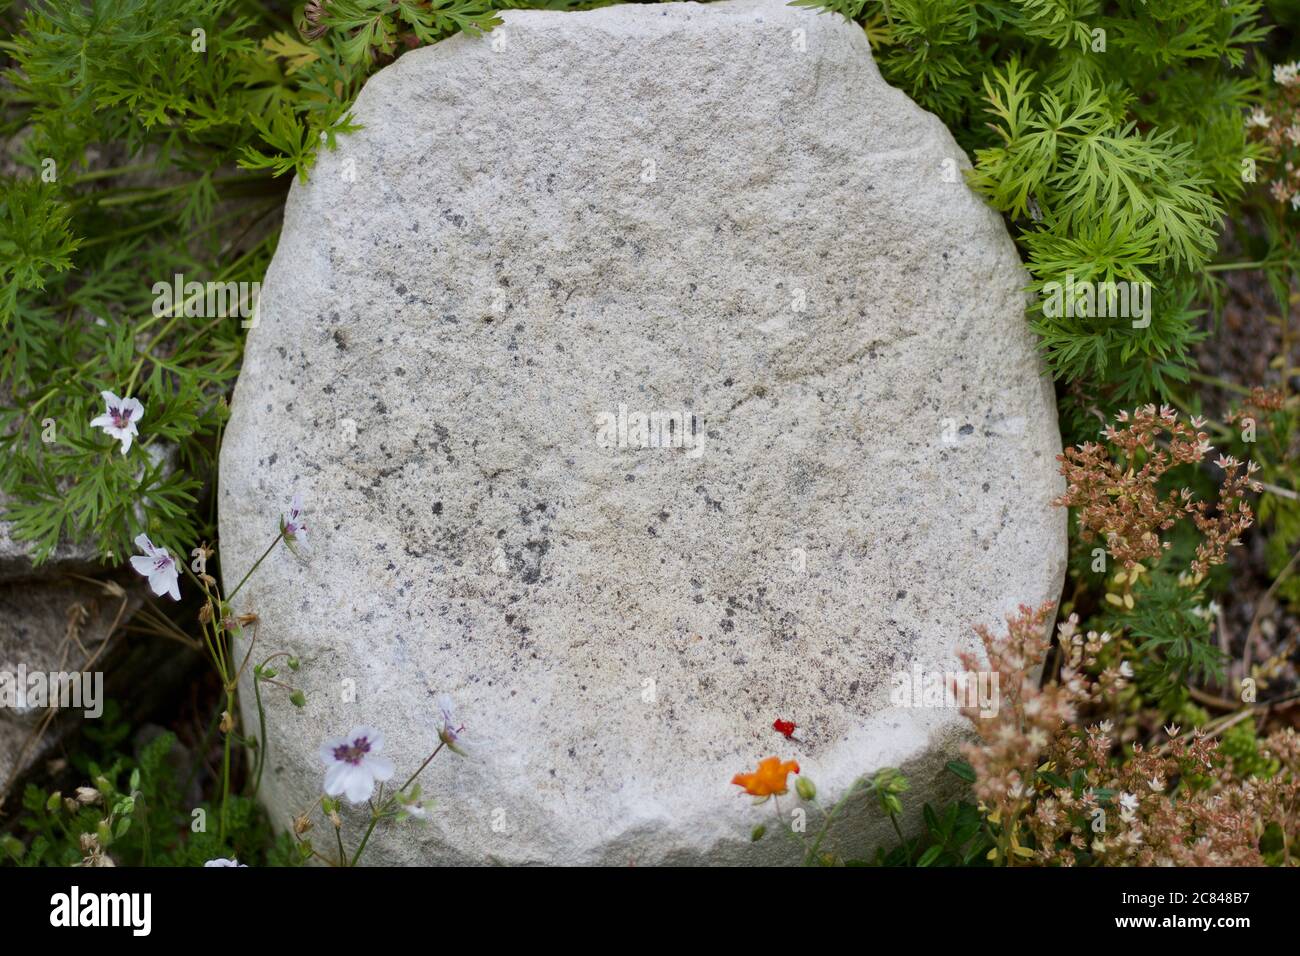 Background of white stone in garden setting with copy space Stock Photo